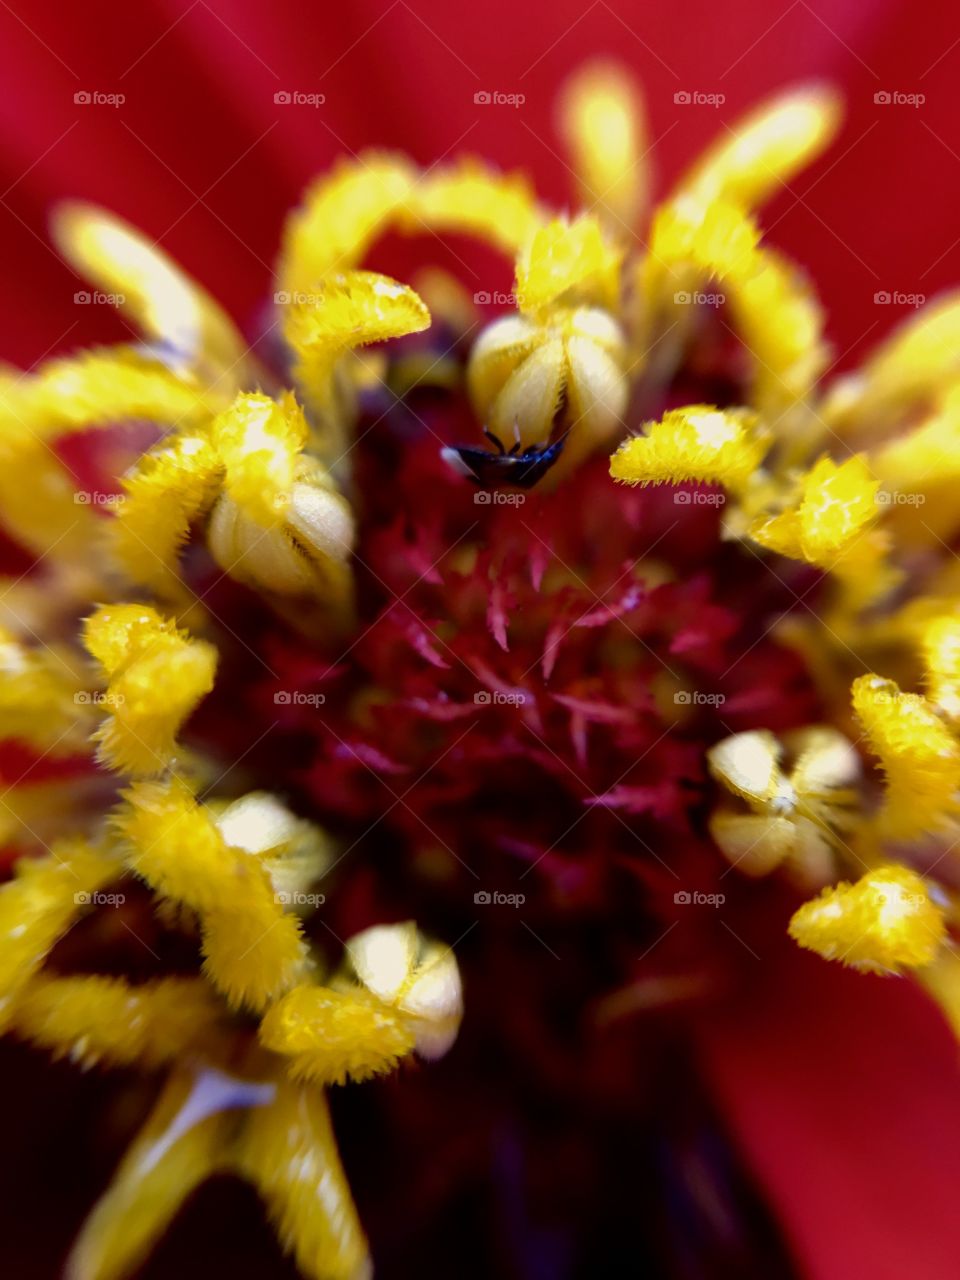 Bug on pistil and yellow stamen of a red flower.